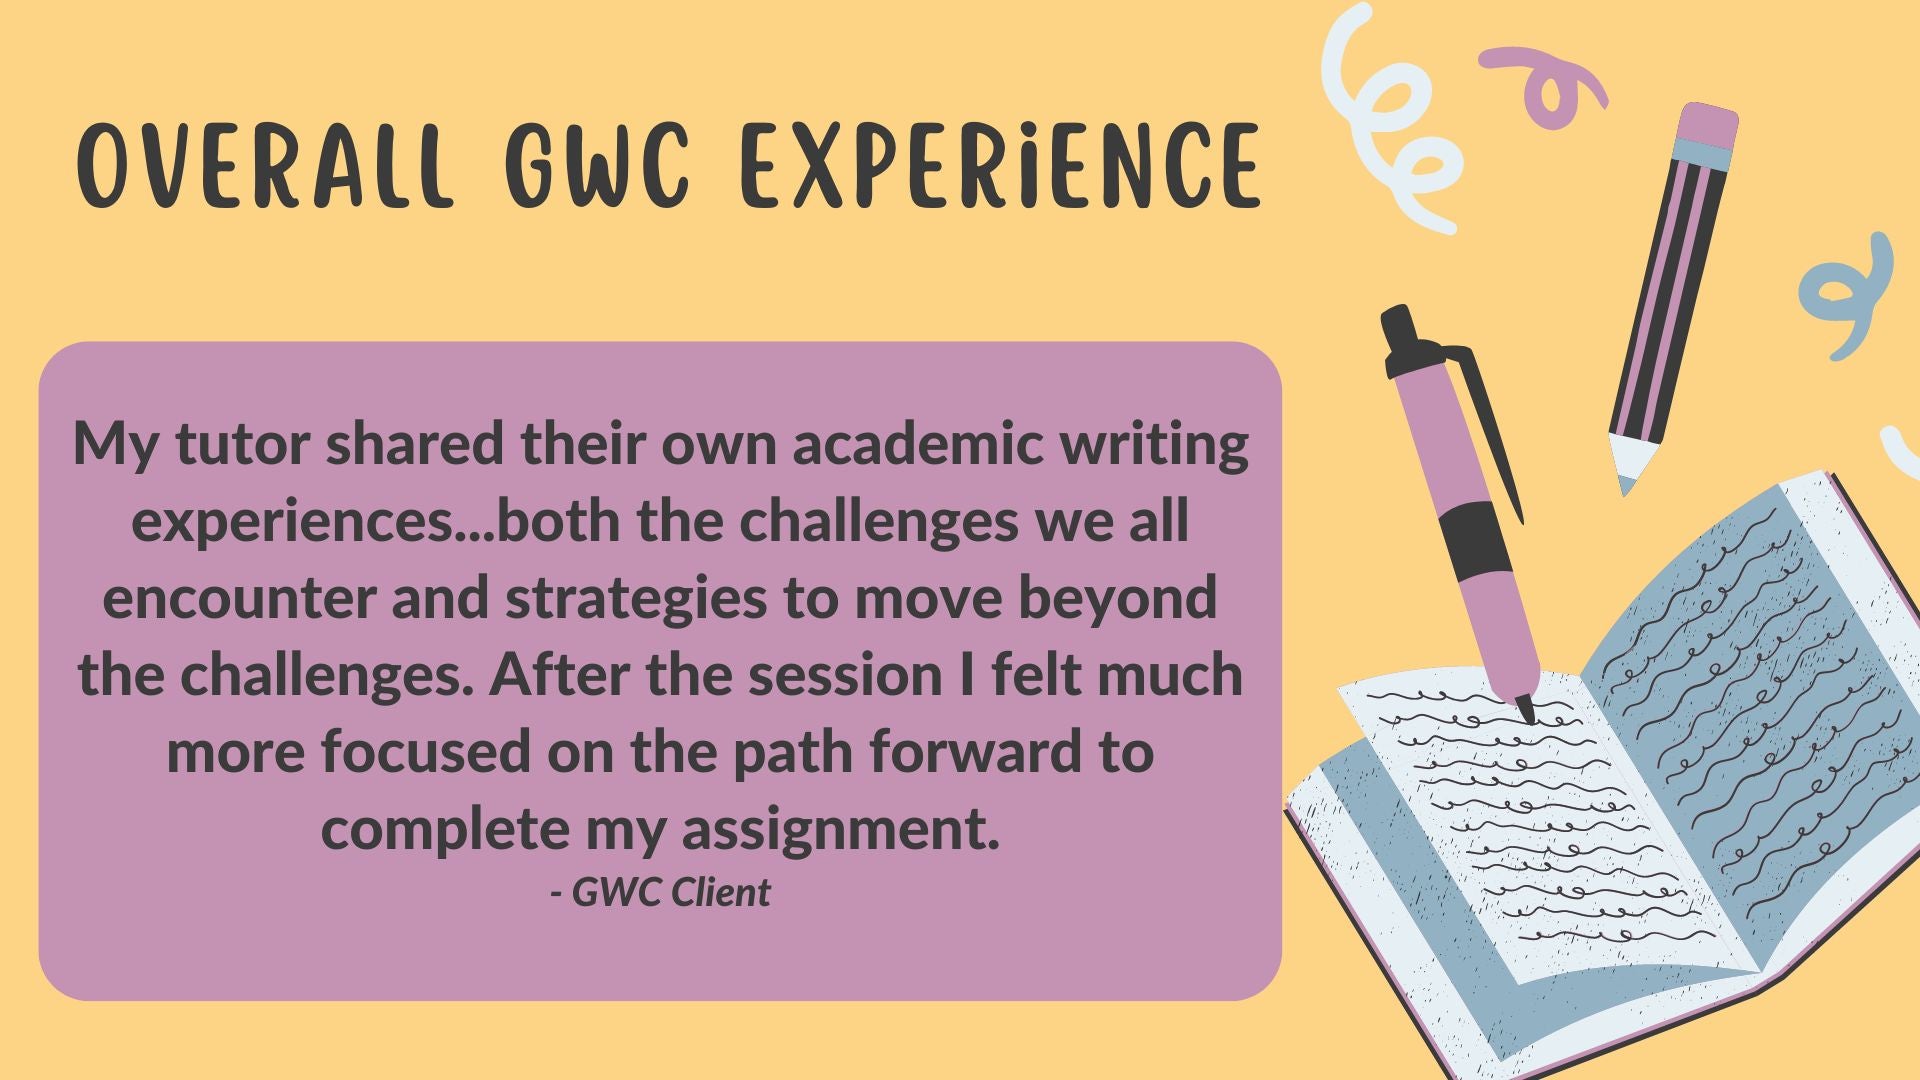 An image of GWC client feedback describing the "overall GWC experience": My tutor shared their own academic writing experiences...both the challenges we all encounter and strategies to move beyond the challenges. After the session I felt much more focused on the path forward to complete my assignment.